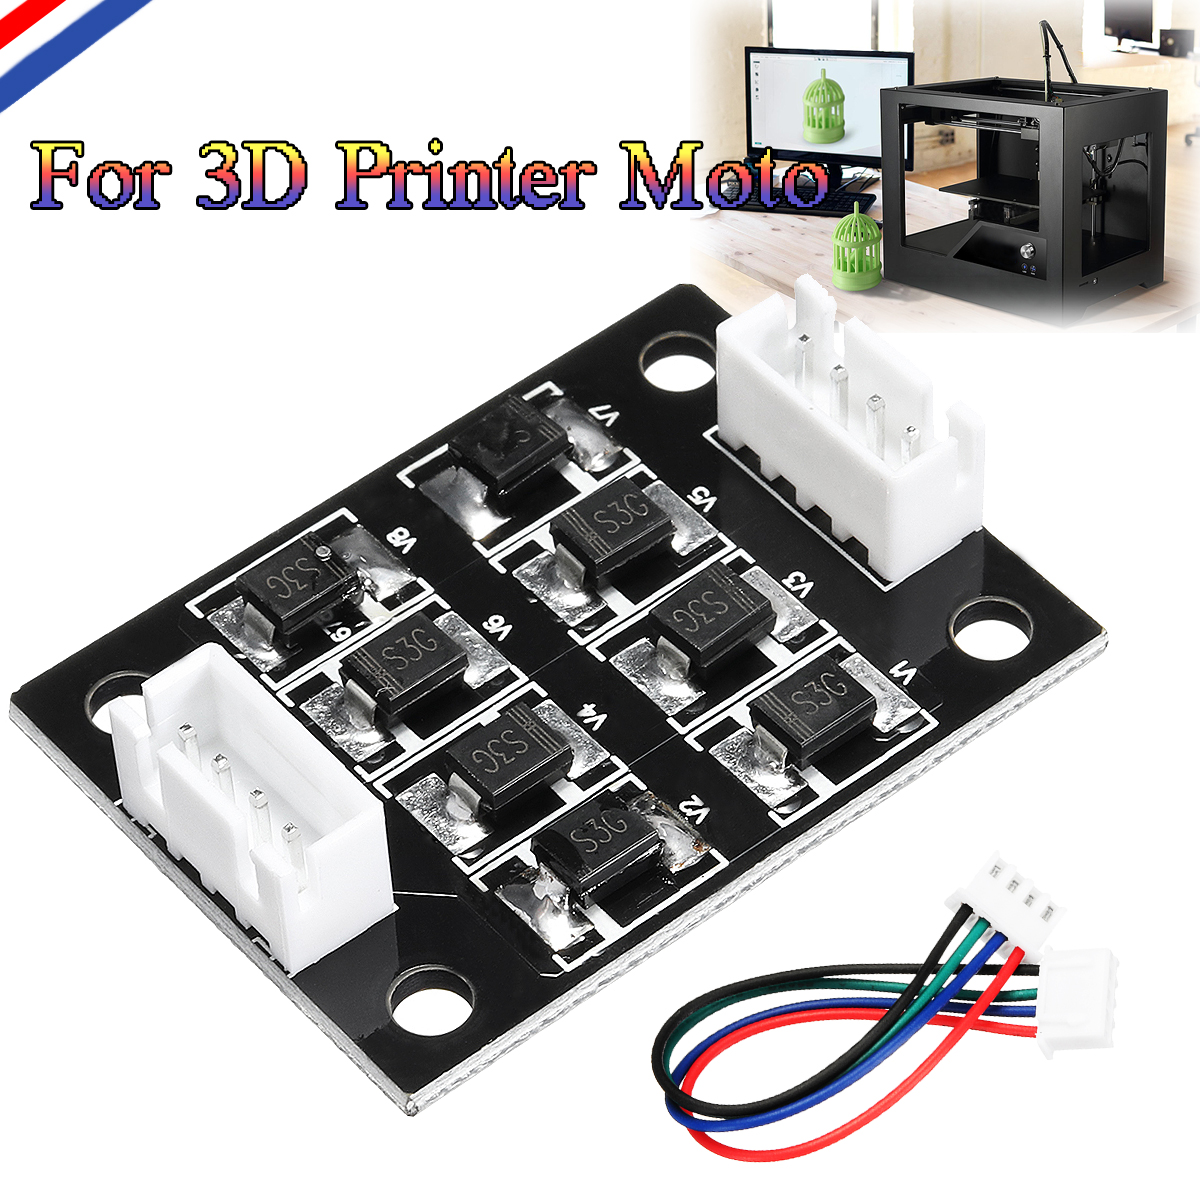 5PCS TL-Smoother Addon Module With Dupont Line For 3D Printer Stepper Motor 9